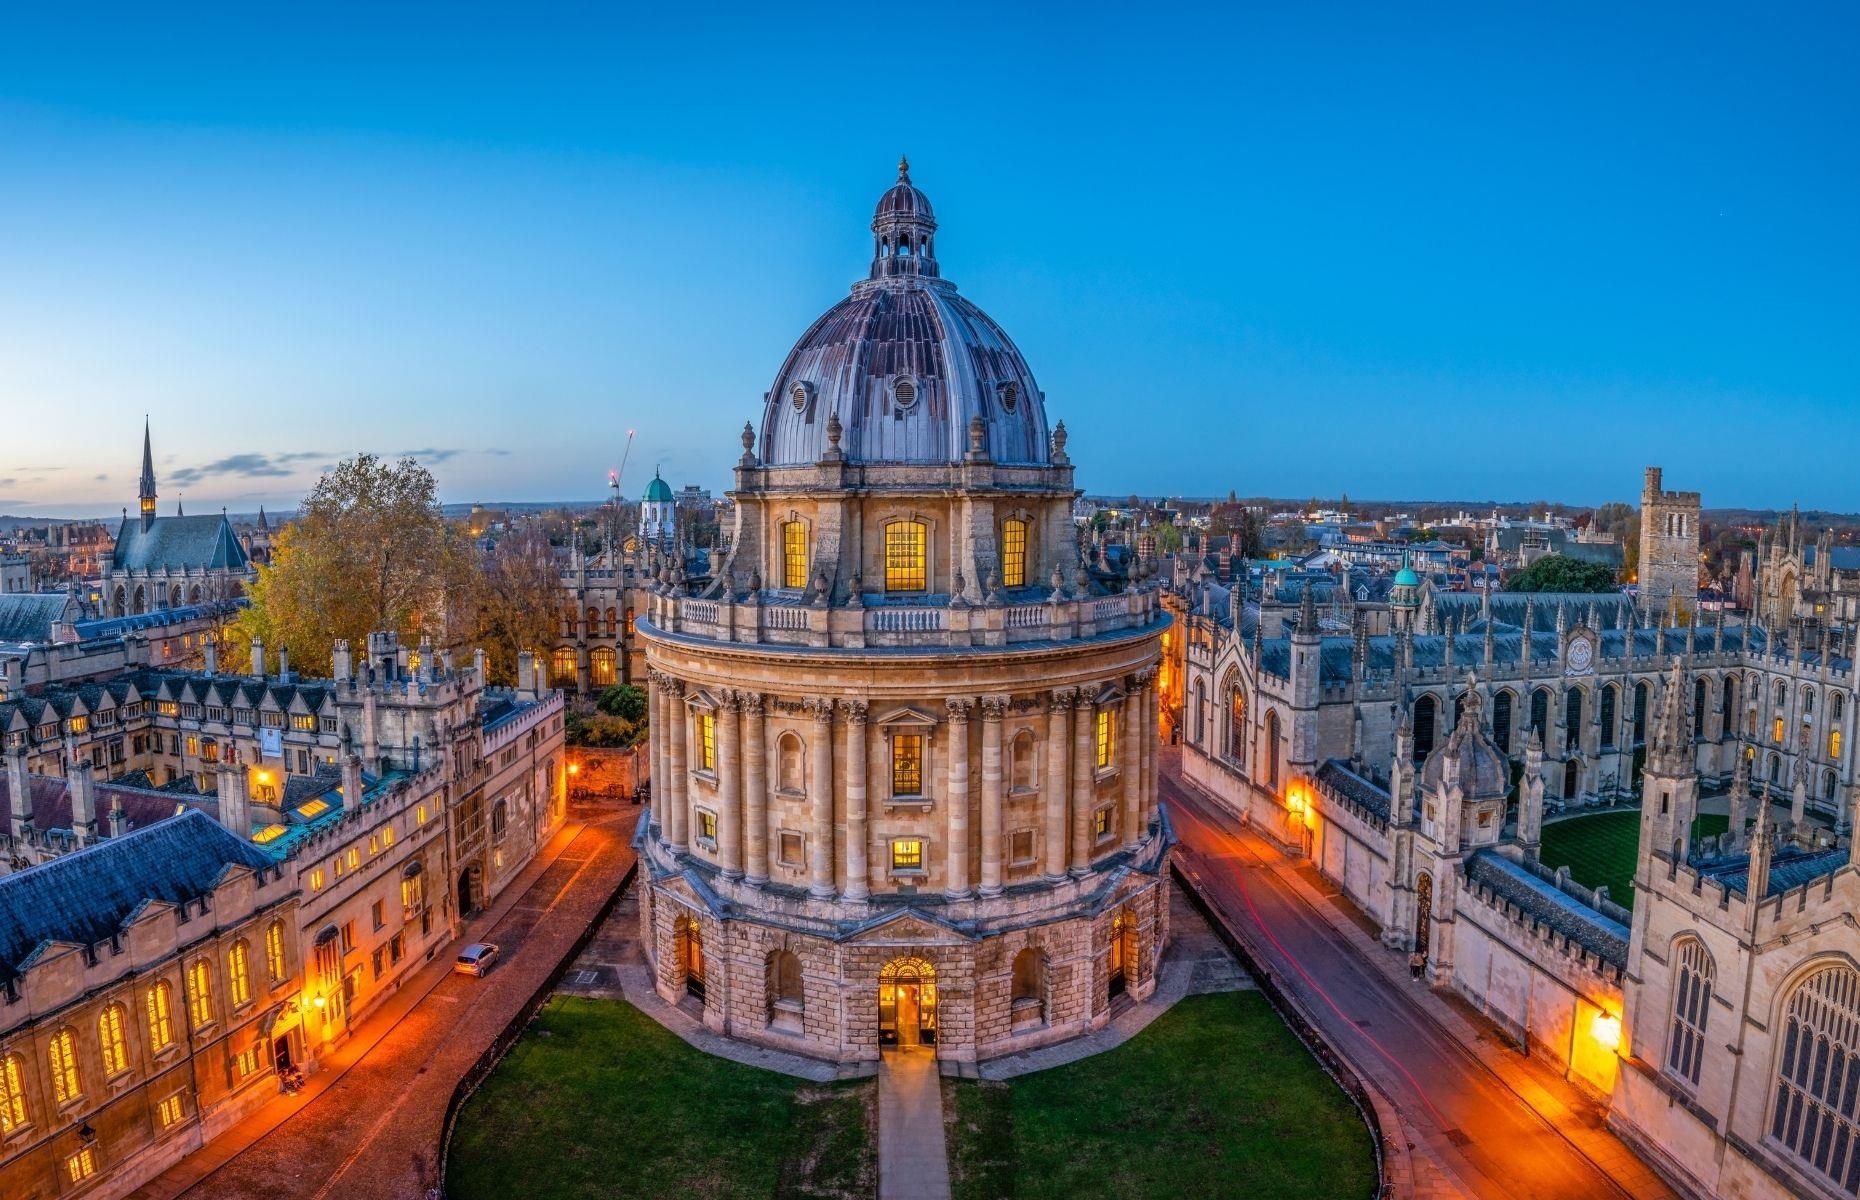 <p>One of the world's most iconic education universities, <a href="https://www.loveexploring.com/news/72568/the-top-things-to-do-in-oxford-attractions">Oxford</a> has a storied history and a truly spectacular campus. Positioned in the heart of Oxford, it's thought to have been in operation since 1096: that makes it the oldest university in the English-speaking world. Often topping the World University Rankings, this incredible institution is famous for its historic buildings (like Radcliffe Camera, pictured), which attract millions of tourists every single year. In fact, the university owns 67 listed buildings across the city.</p>  <p><a href="https://www.loveexploring.com/galleries/161253/creepy-and-abandoned-campuses-around-the-world?page=1"><strong>Now discover these creepy abandoned campuses around the world</strong></a></p>